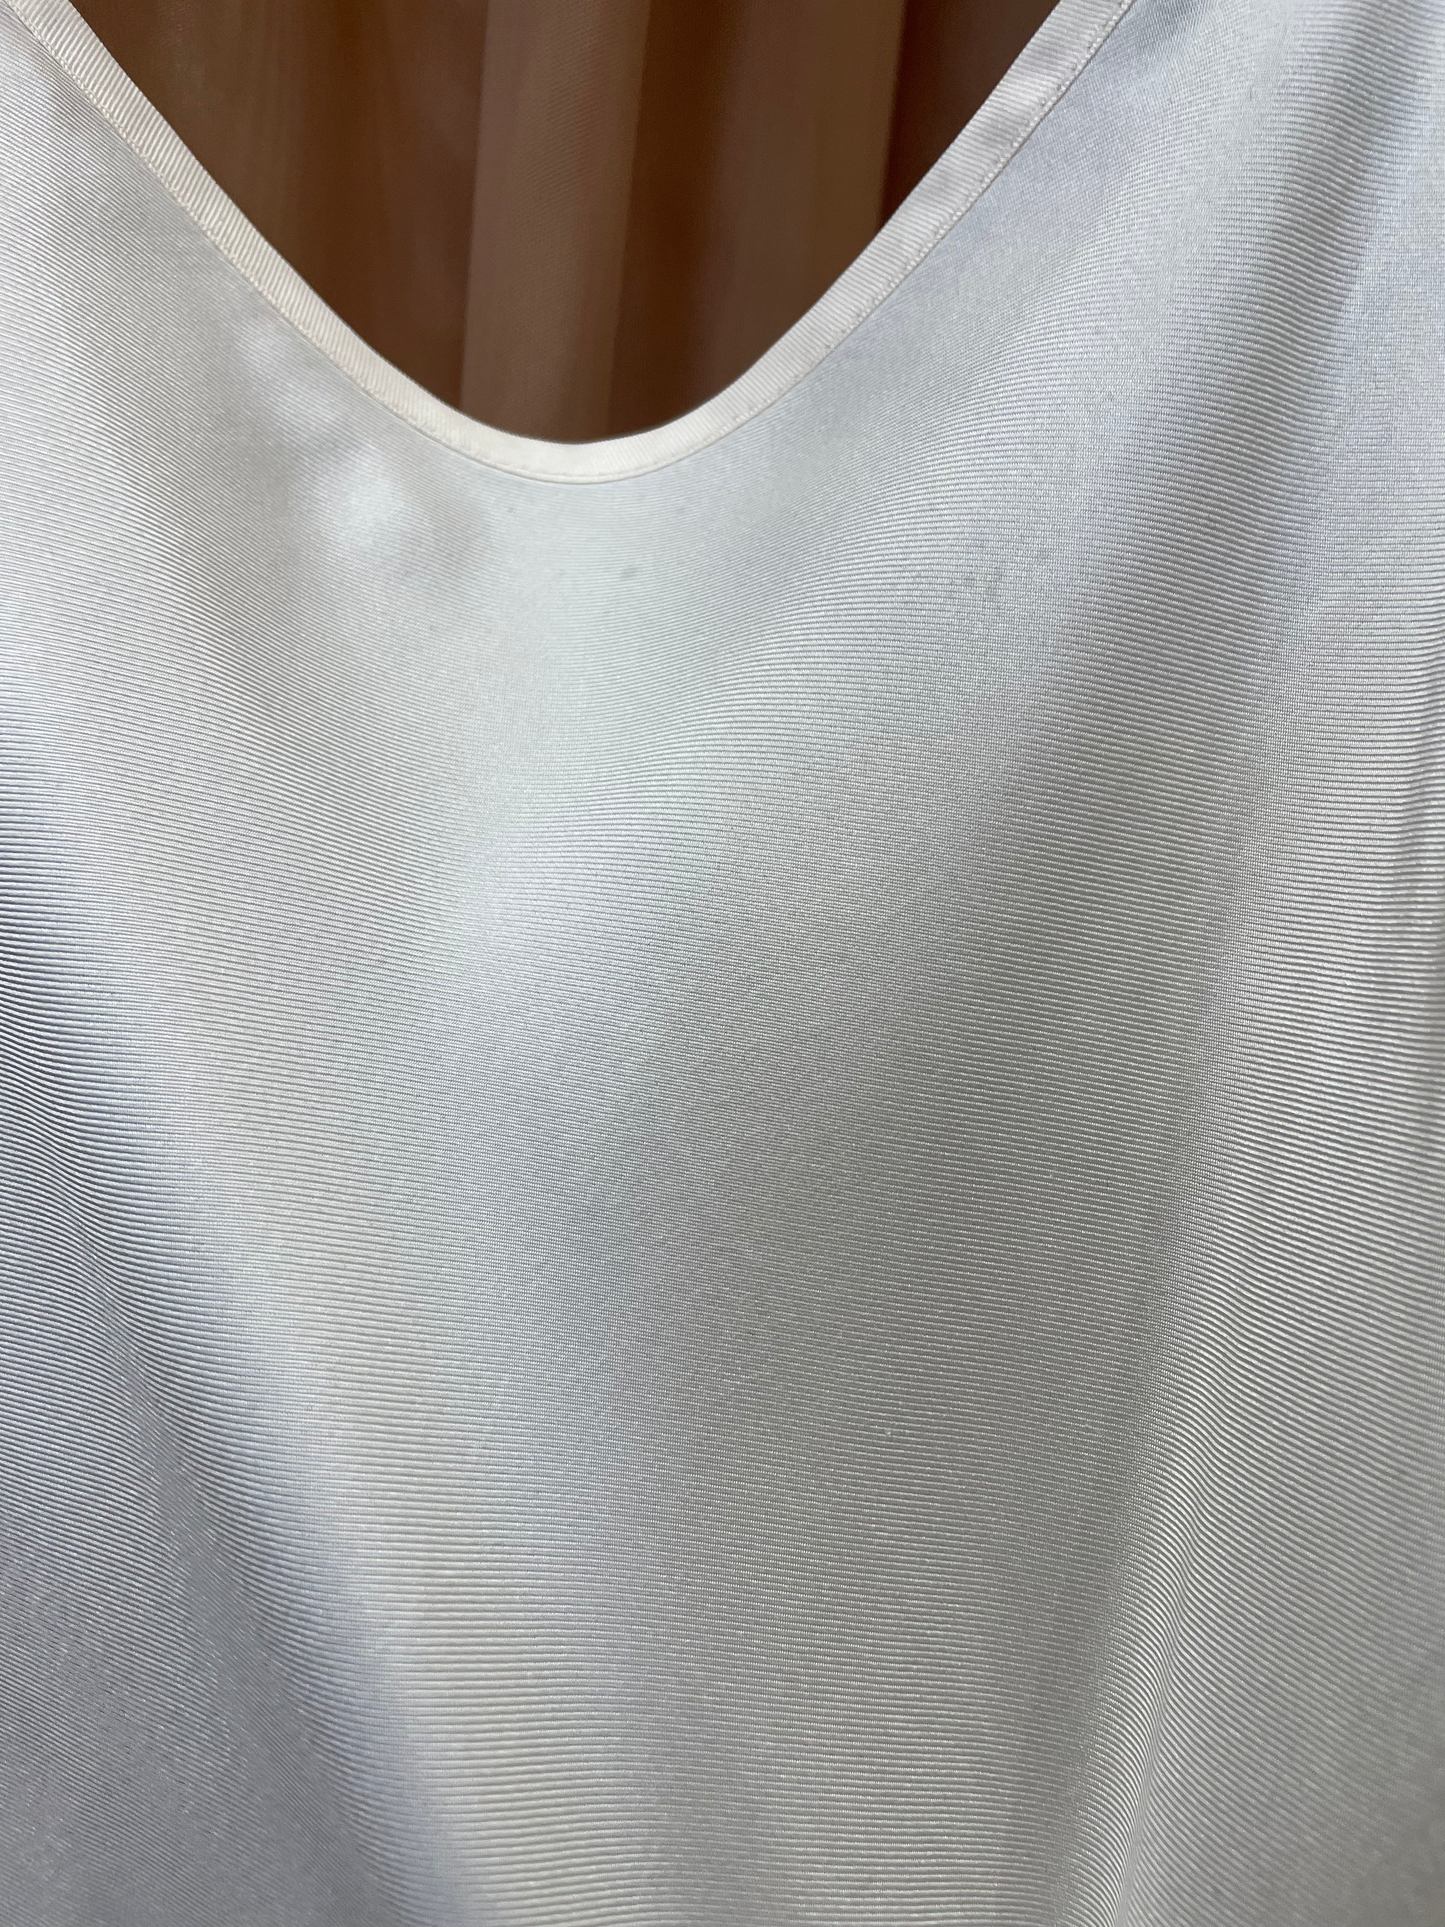 Archive Sample | Dreams Top Rock ~ Ivory Silk Twill